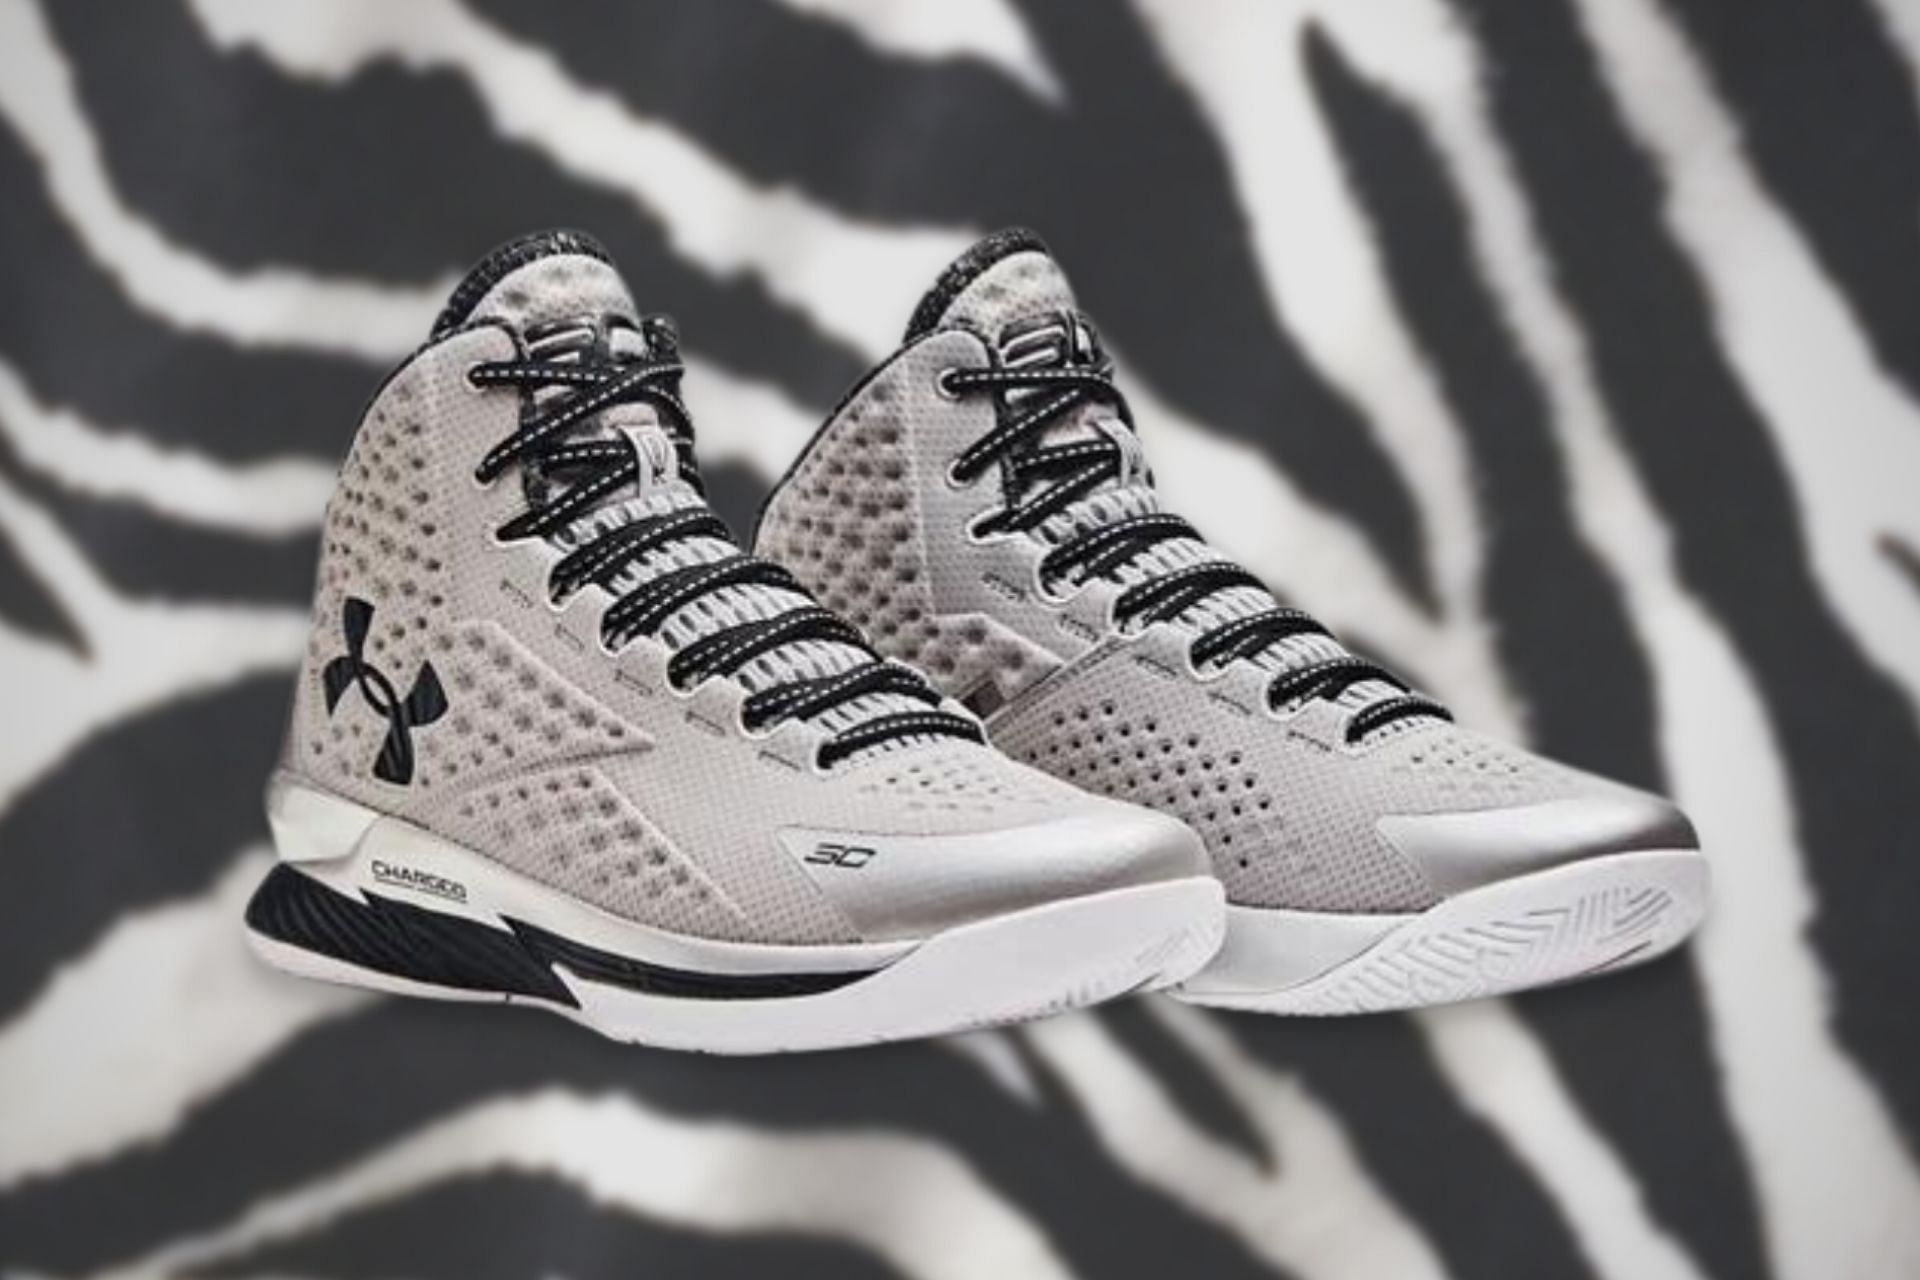 Stephen Curry x Under Armour Curry 1 &quot;Black History Month&quot; sneakers (Image via Under Armour)